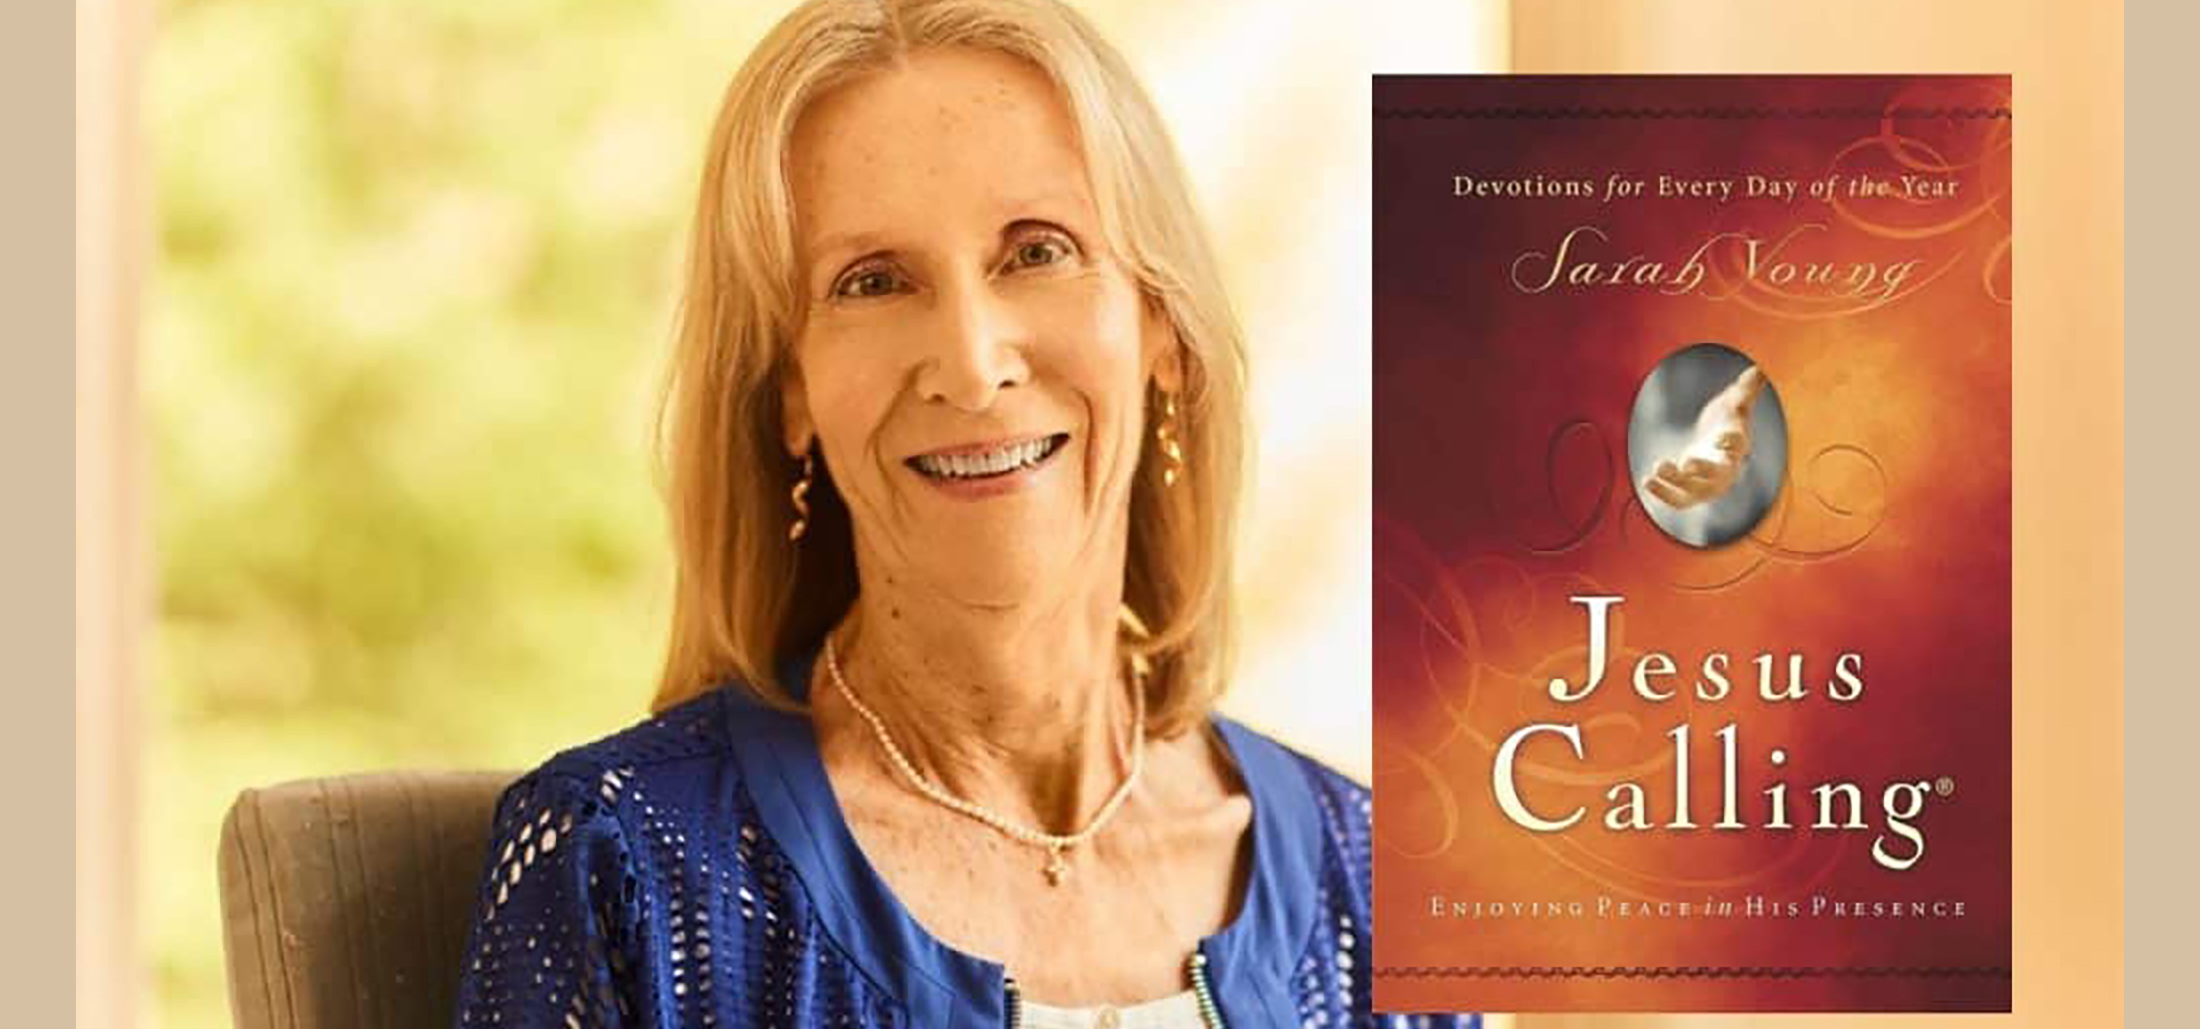 Why is the PCA so upset about a superficial book like Jesus Calling? – Baptist News Global